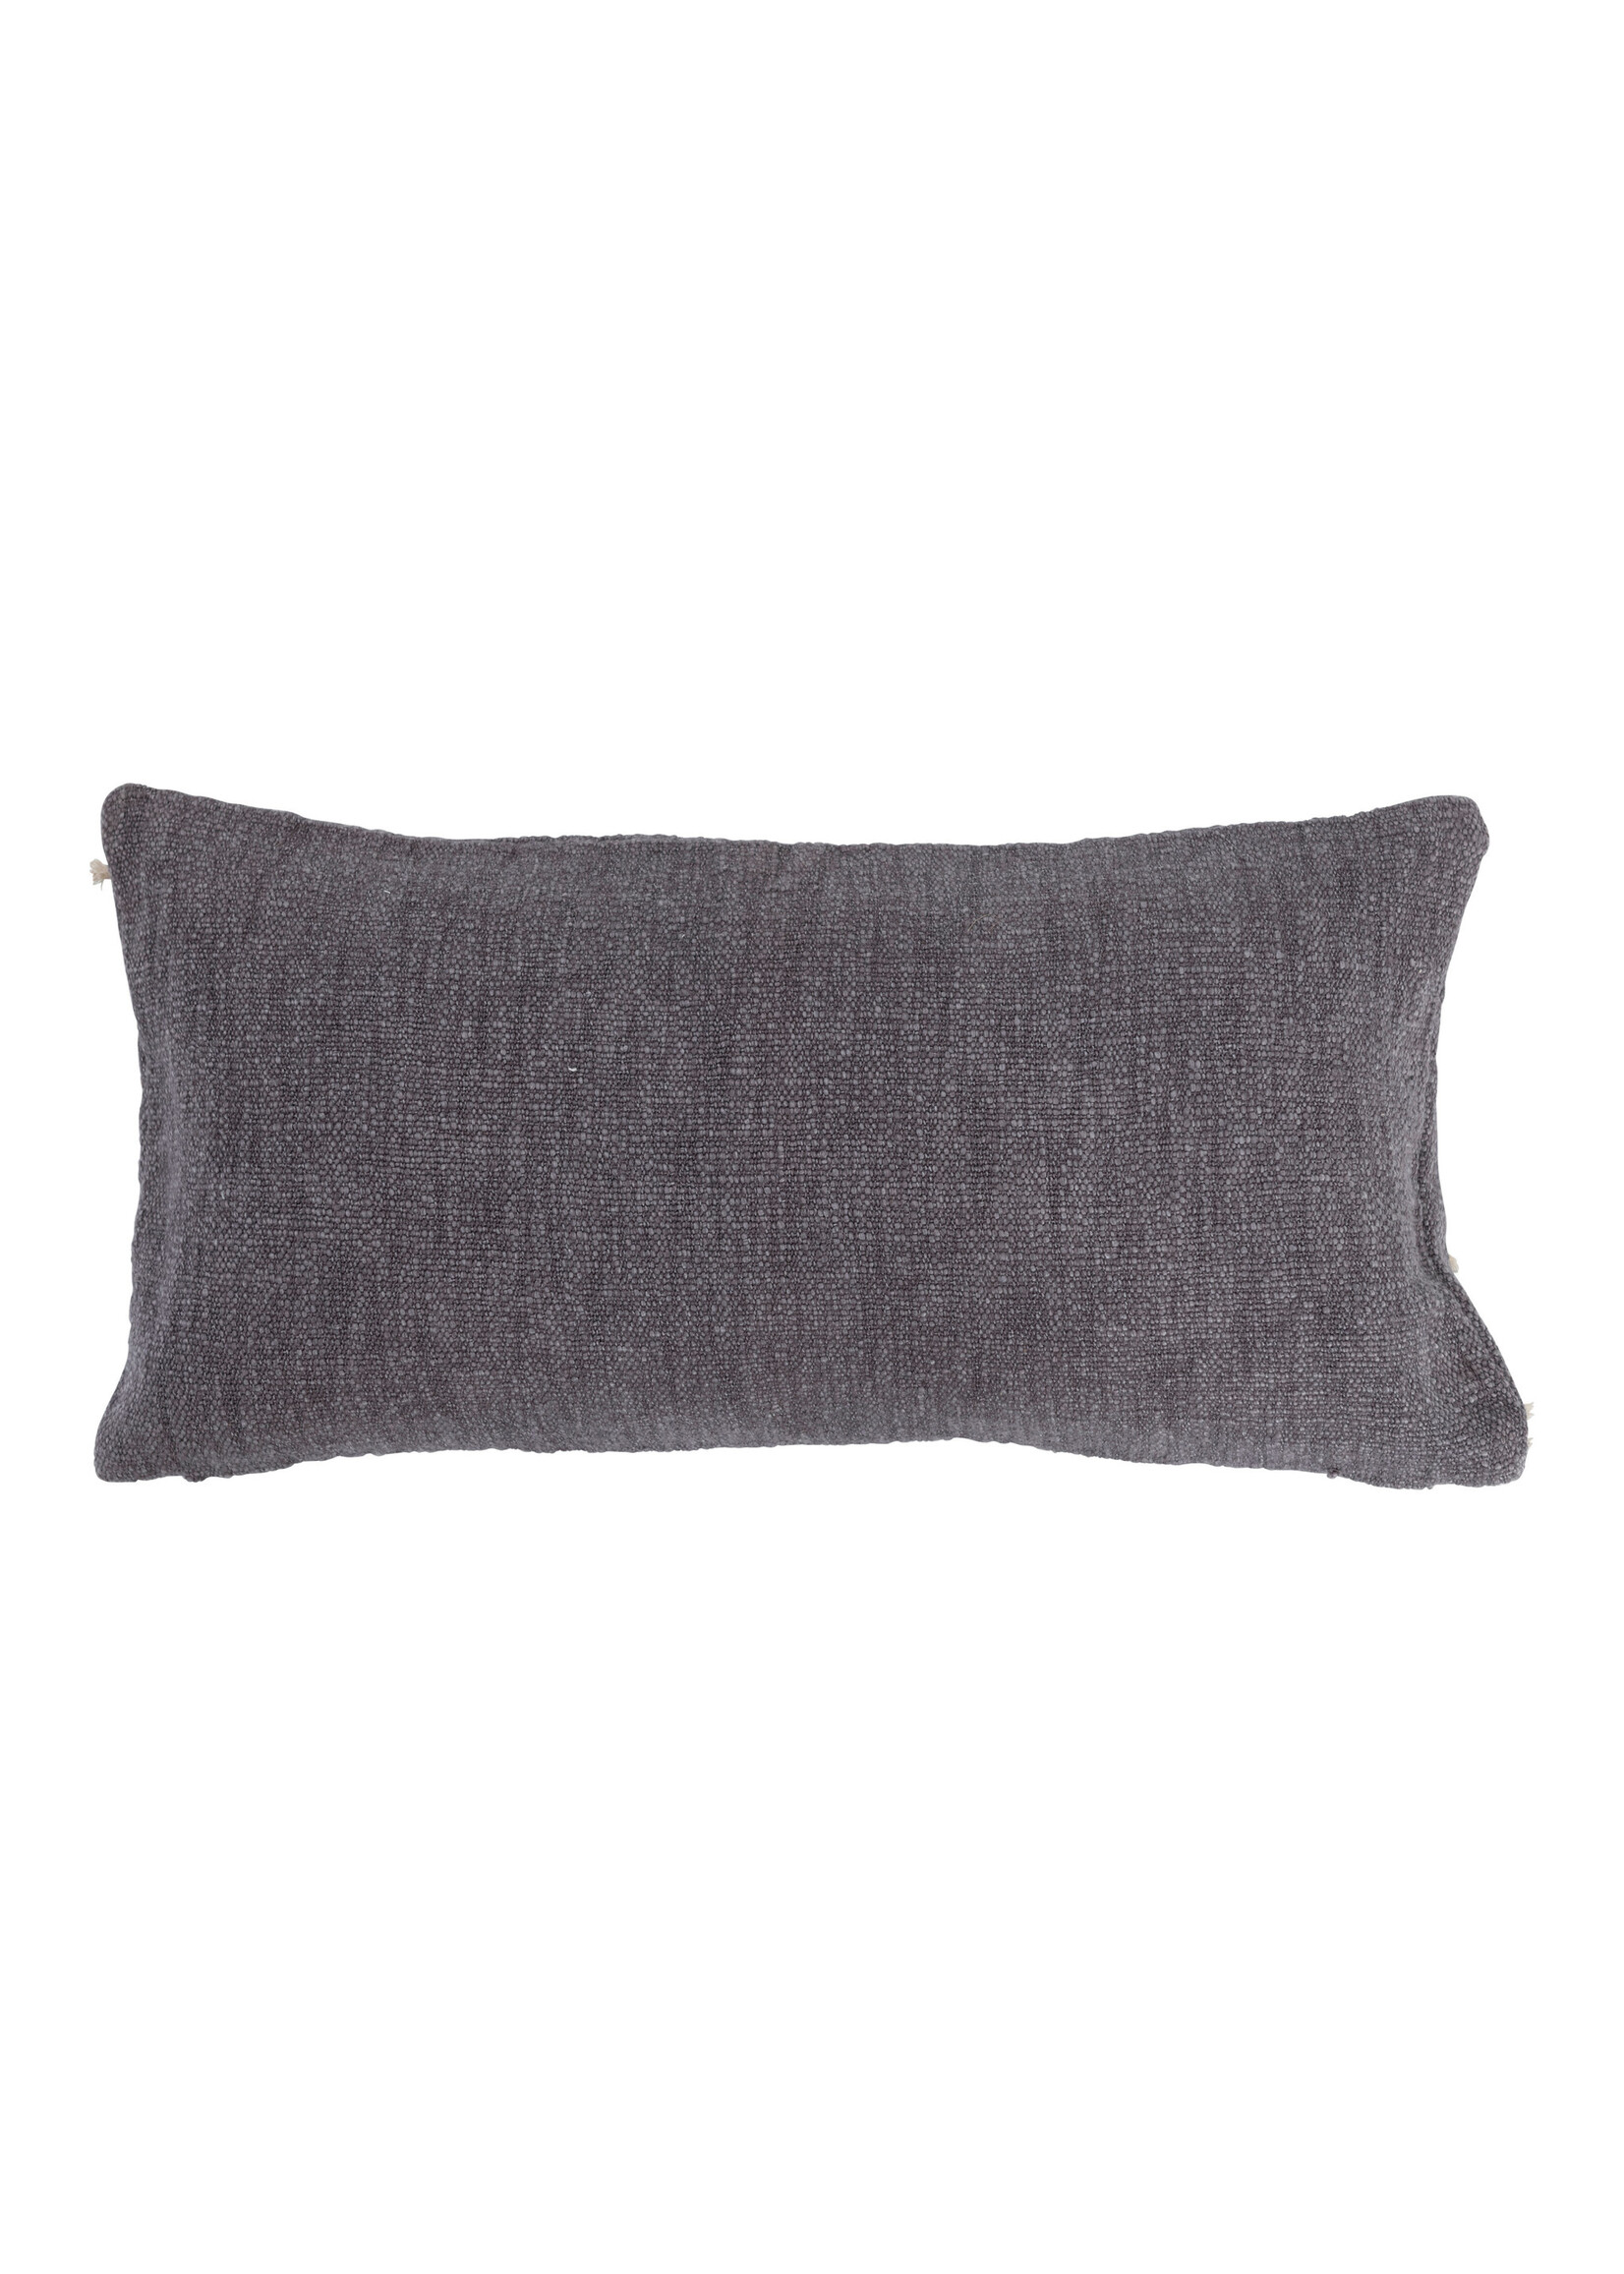 24" x 12" Cotton Lumbar Pillow with Appliqued Rope & Metallic Embroidery Grey